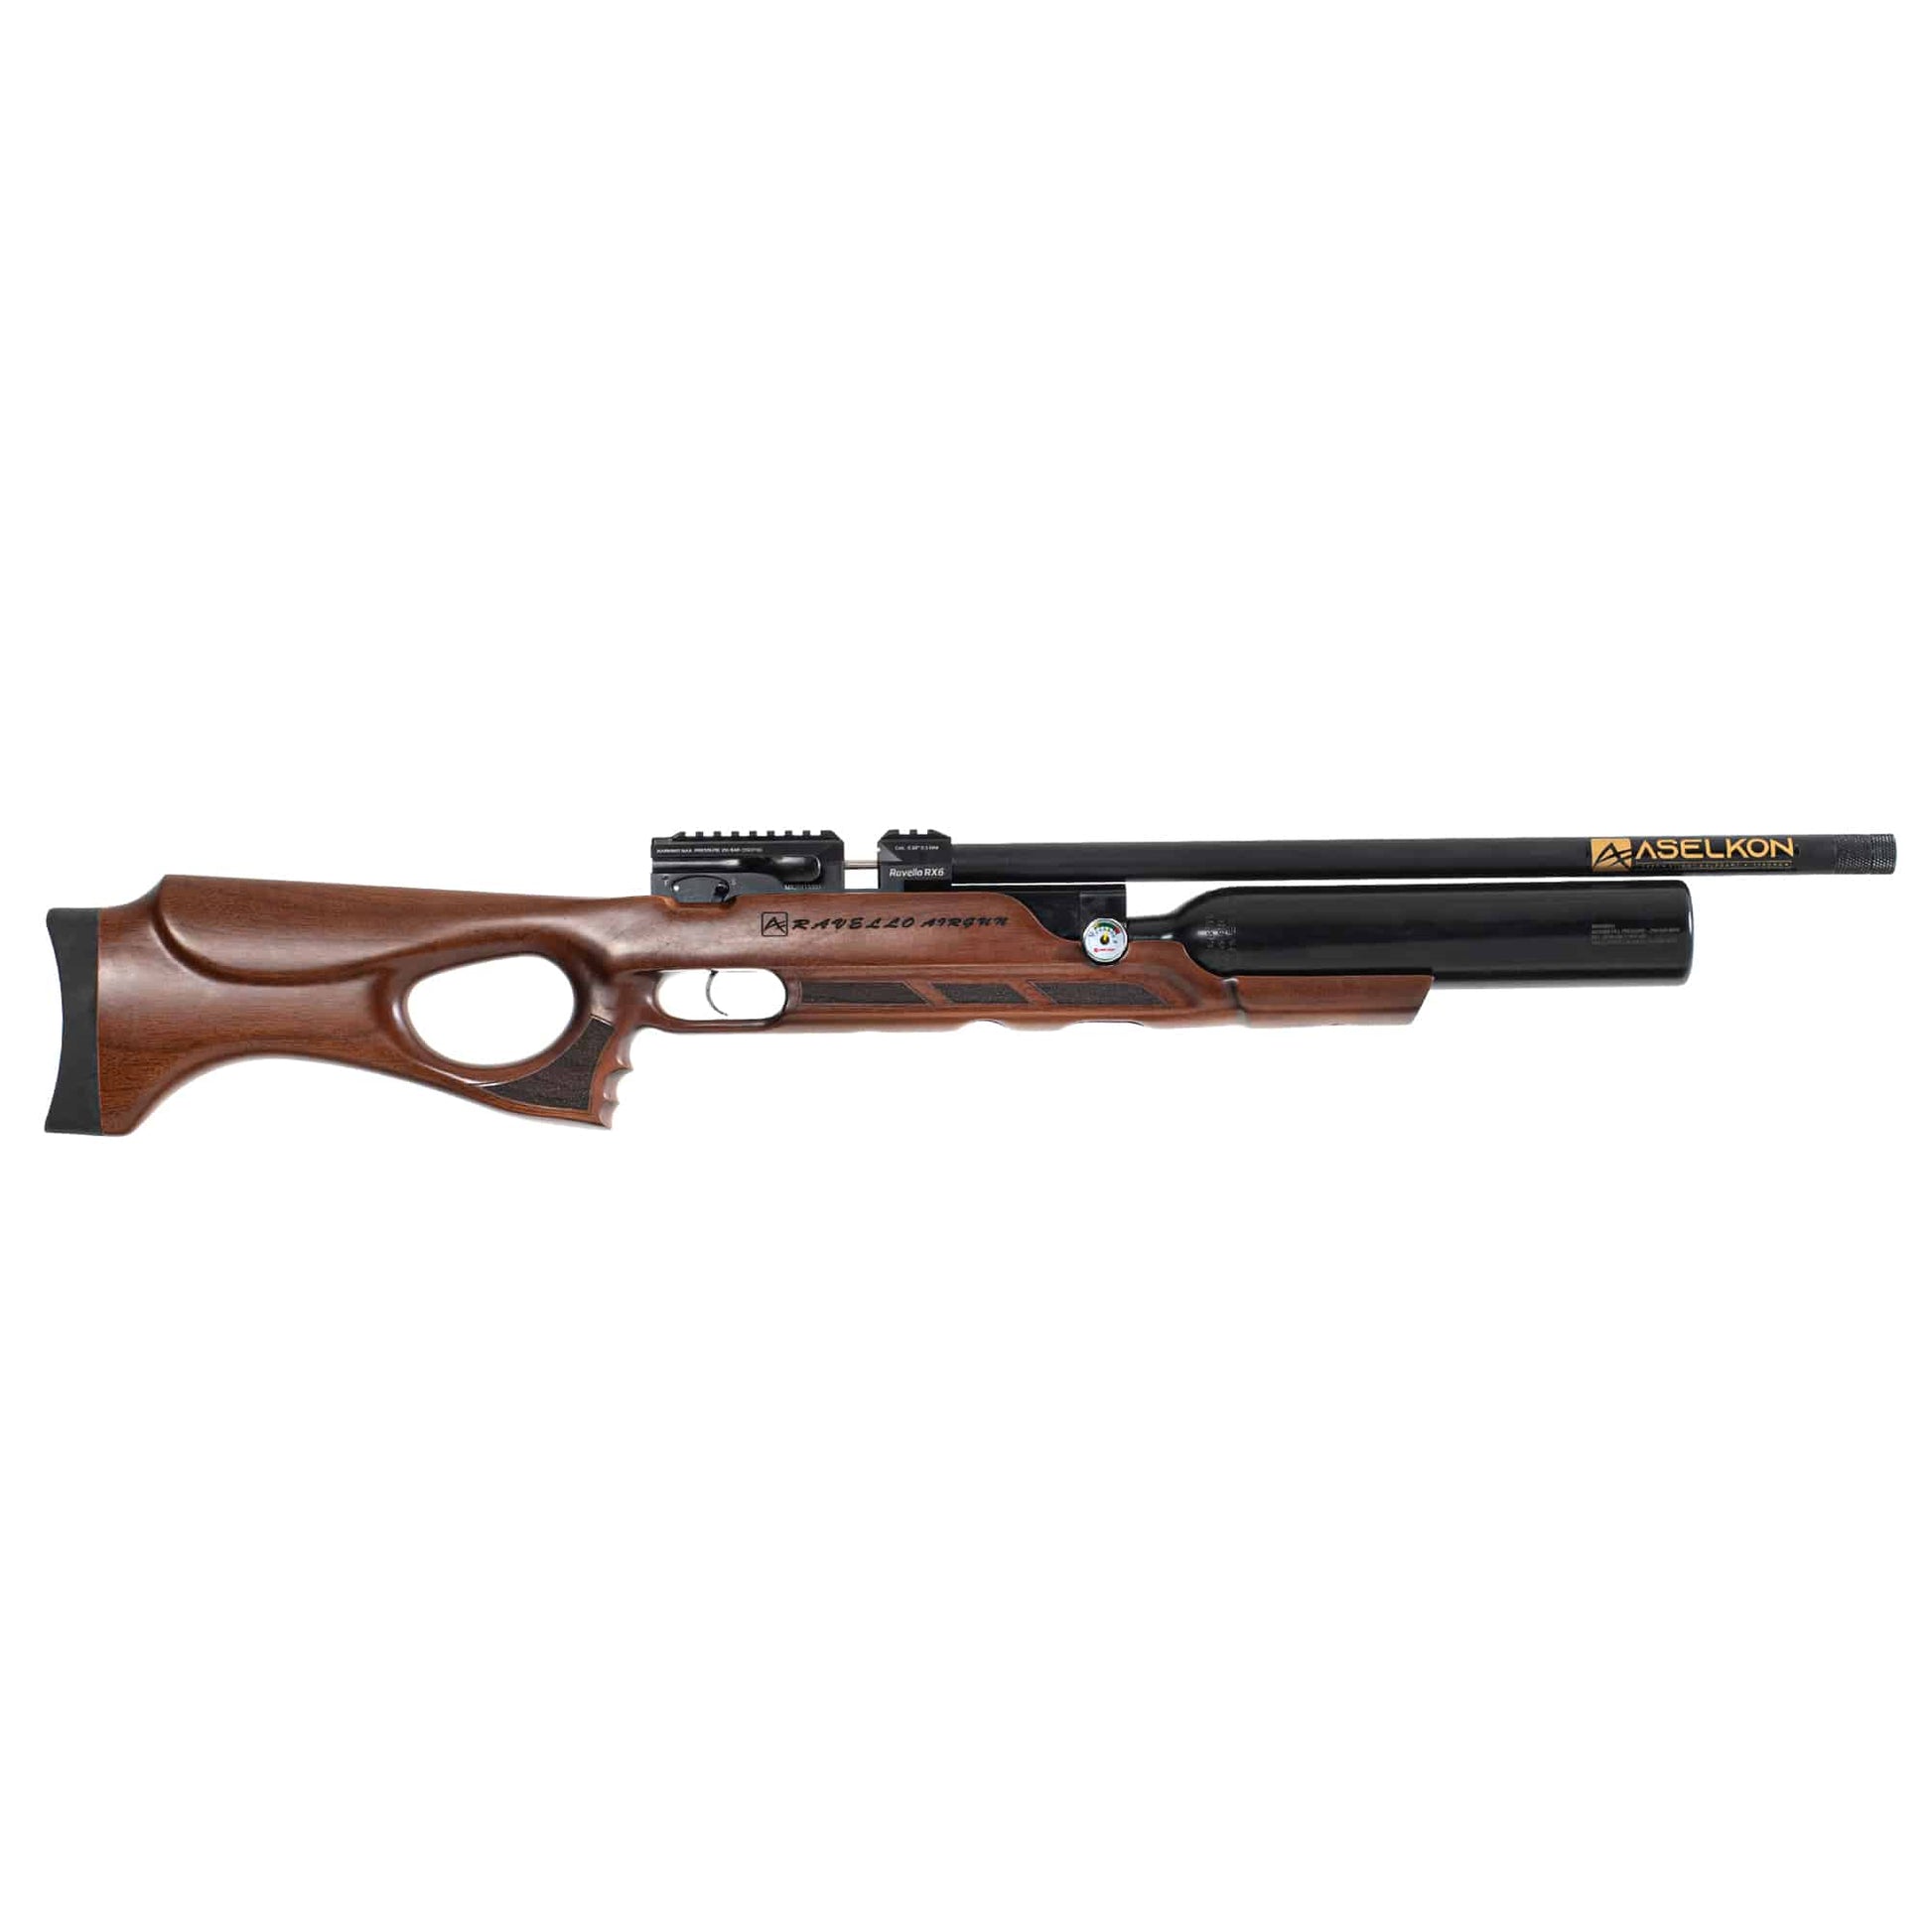 Right side view of a brown and black Aselkon Ravello RX6 .25 Caliber PCP Air Rifle